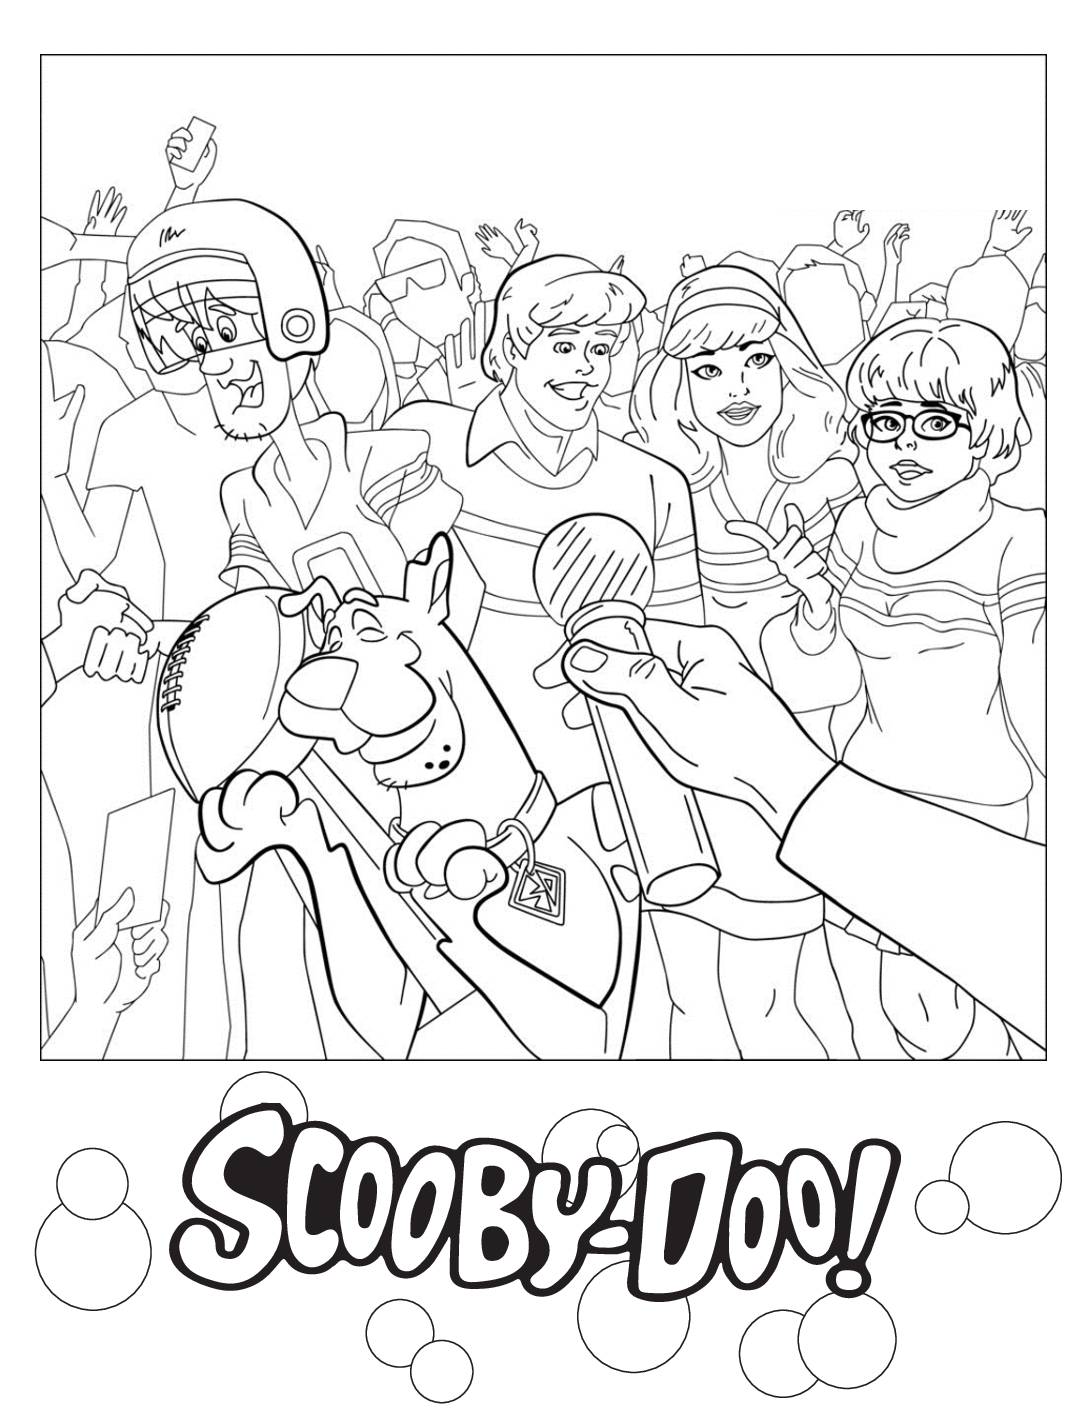 Coloring Page 3 Scooby Doo